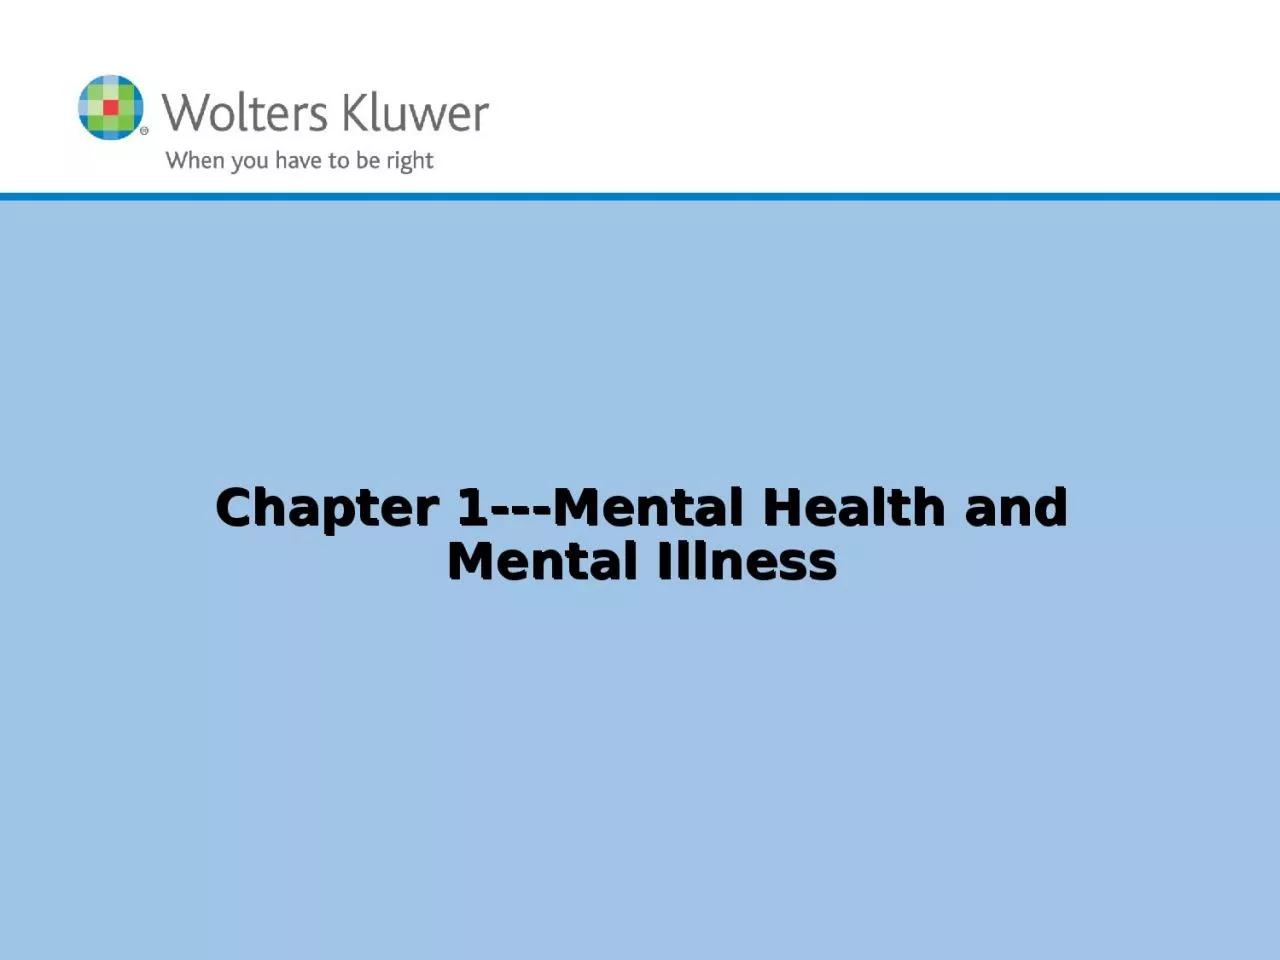 Chapter 1 --- Mental Health and Mental Illness